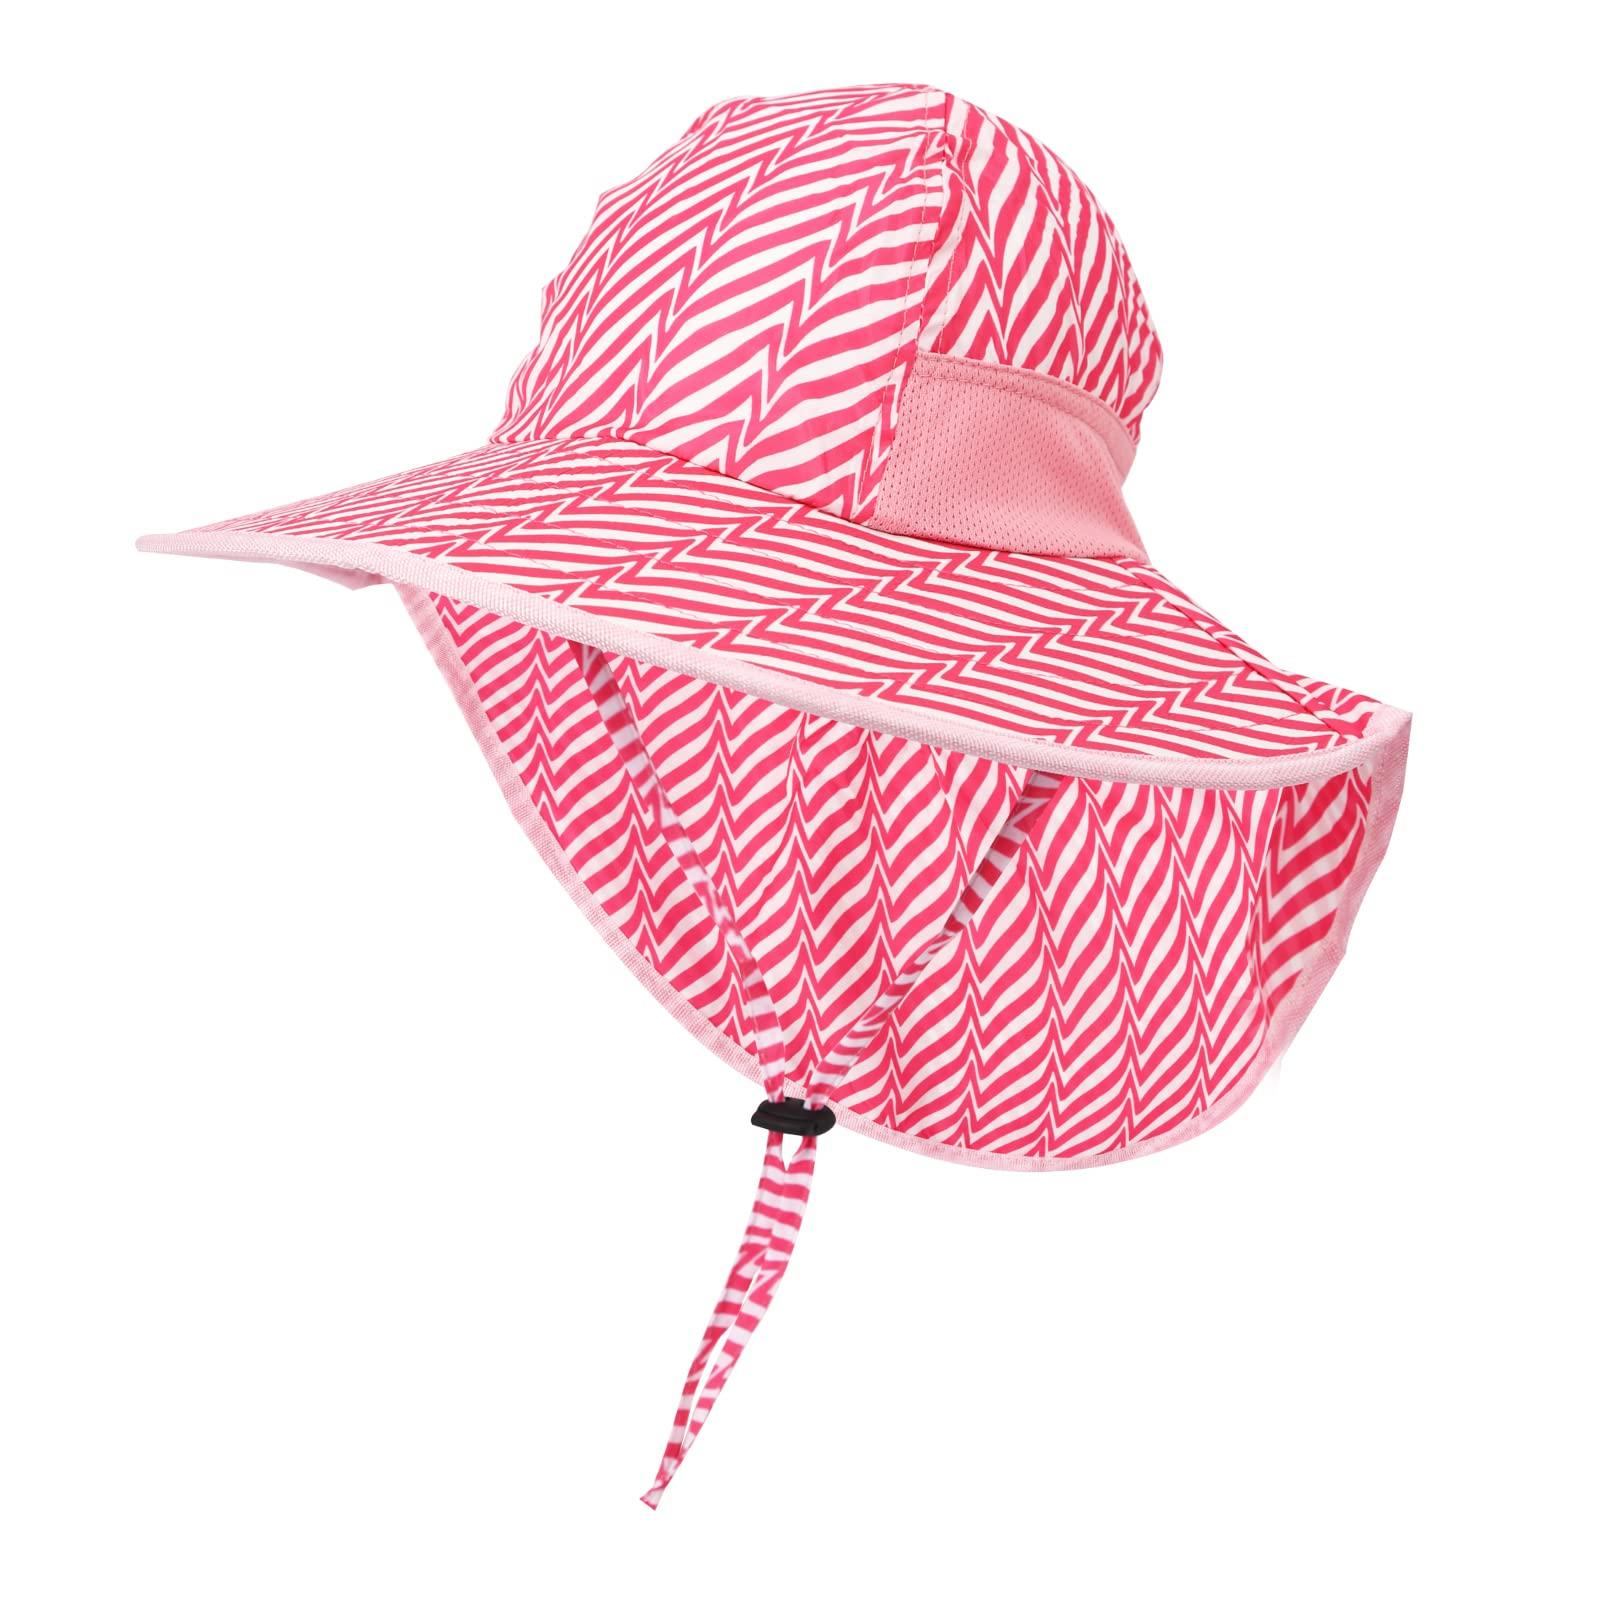 GLAITC Sun Hat Kids, Summer Cap with Neck Flap Adjustable Girls Boys Sun Hat UV Protection Beach Hat with Chin Straps Wide Brim Summer Visor Cap for Baby Toddler and Kids, 3-10 Years (Pink)